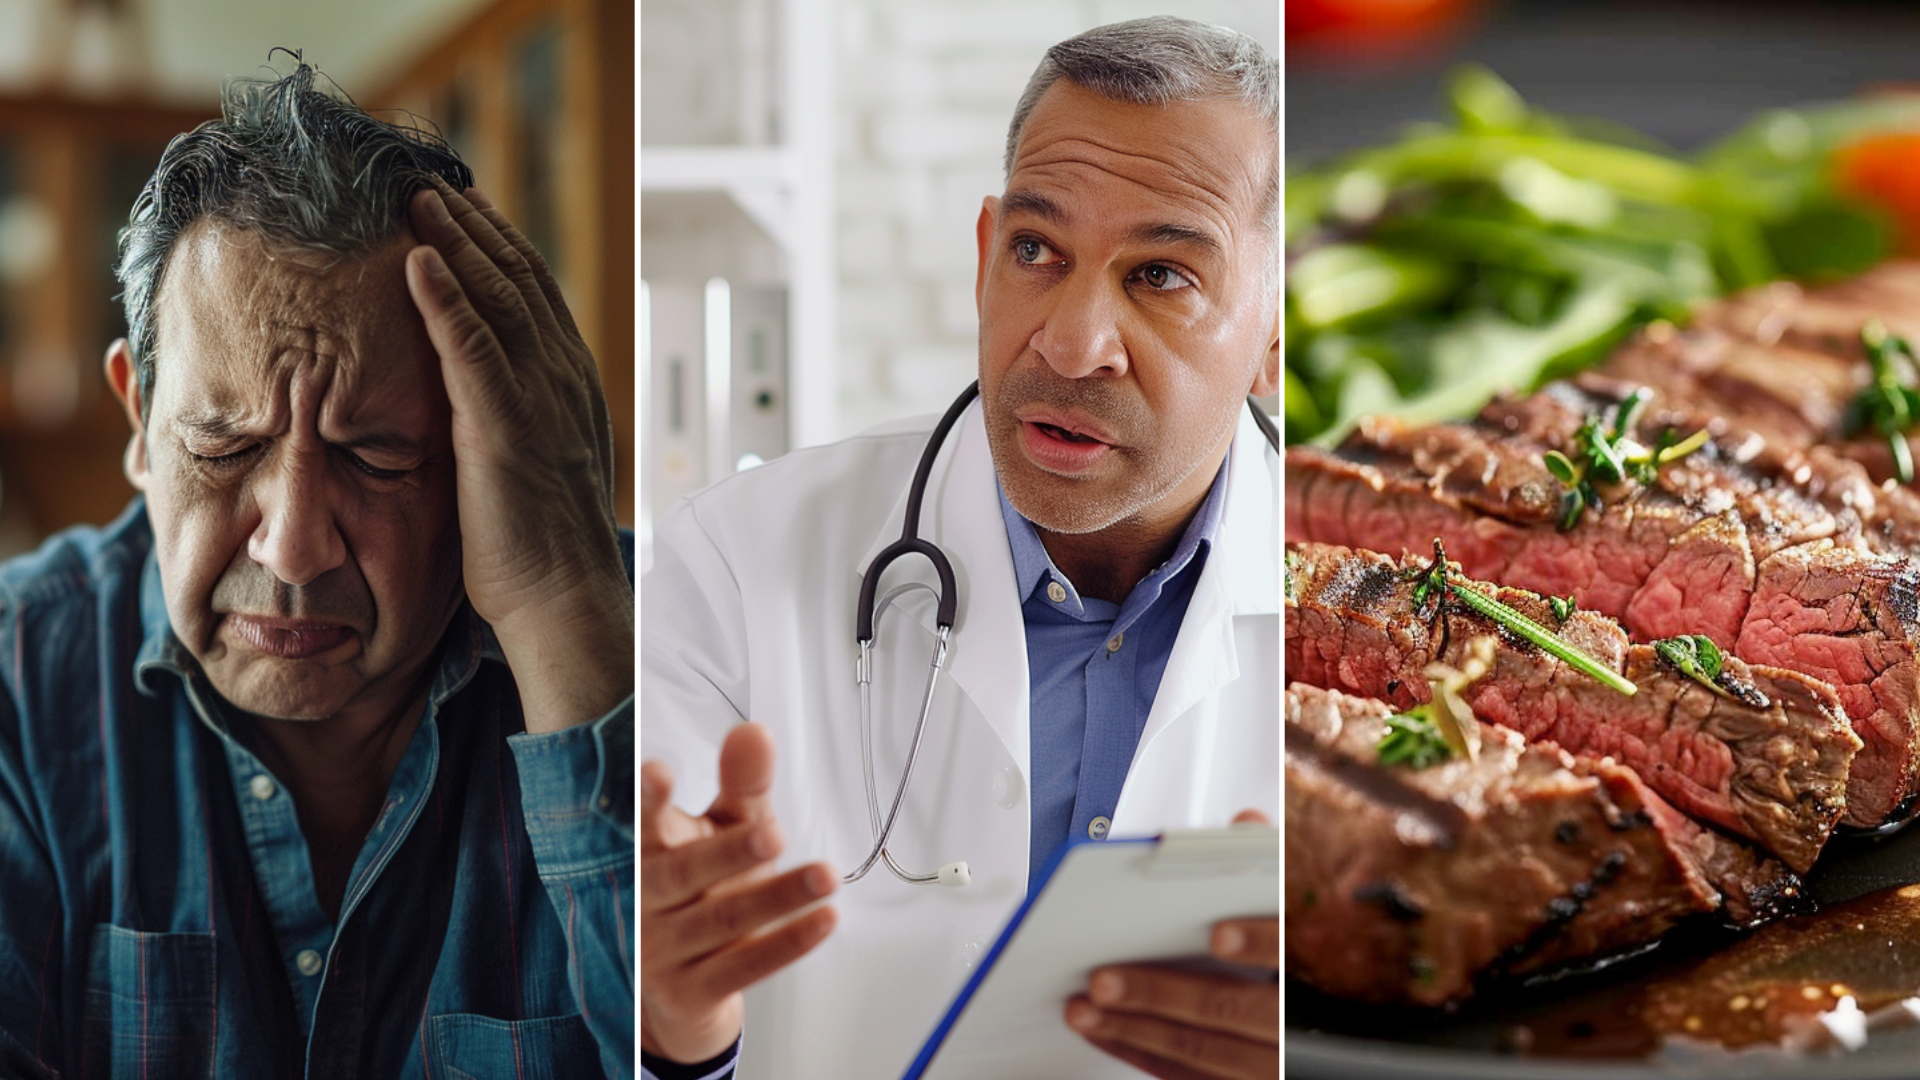 create an image of a hispanic man aged 40-50 years old suffering a dizziness inside his home create an image of a plate with lowcarb diet create an image of a doctor wearing a white coat and holding a clipboard, seated at the table inside the clinic while talking to the patient